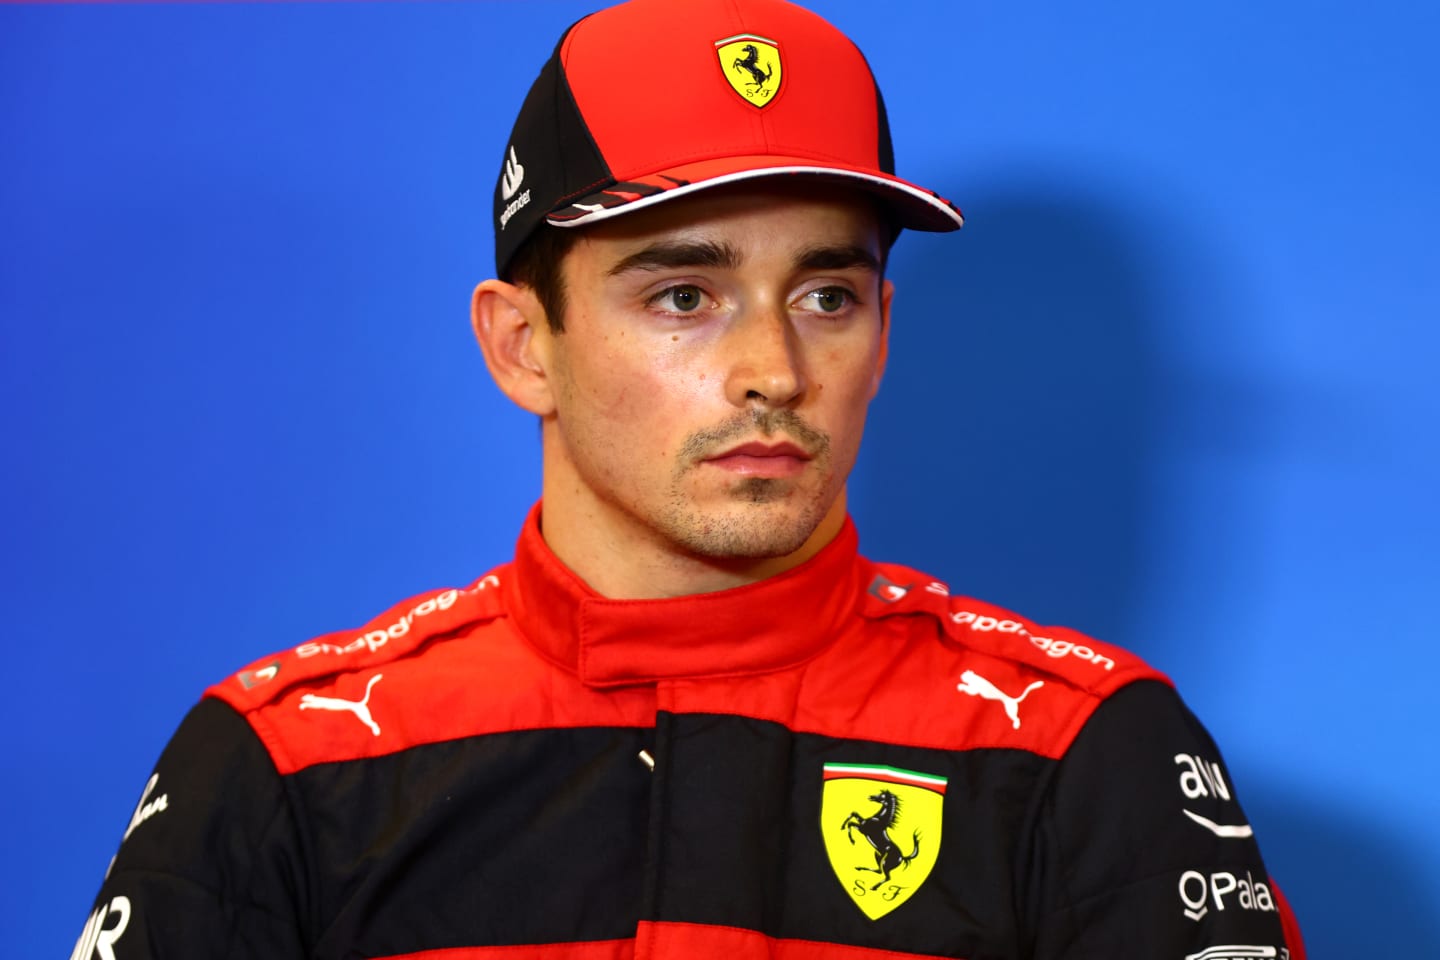 AUSTIN, TEXAS - OCTOBER 22: Second placed qualifier Charles Leclerc of Monaco and Ferrari attends the press conference after qualifying ahead of the F1 Grand Prix of USA at Circuit of The Americas on October 22, 2022 in Austin, Texas. (Photo by Dan Istitene/Getty Images)